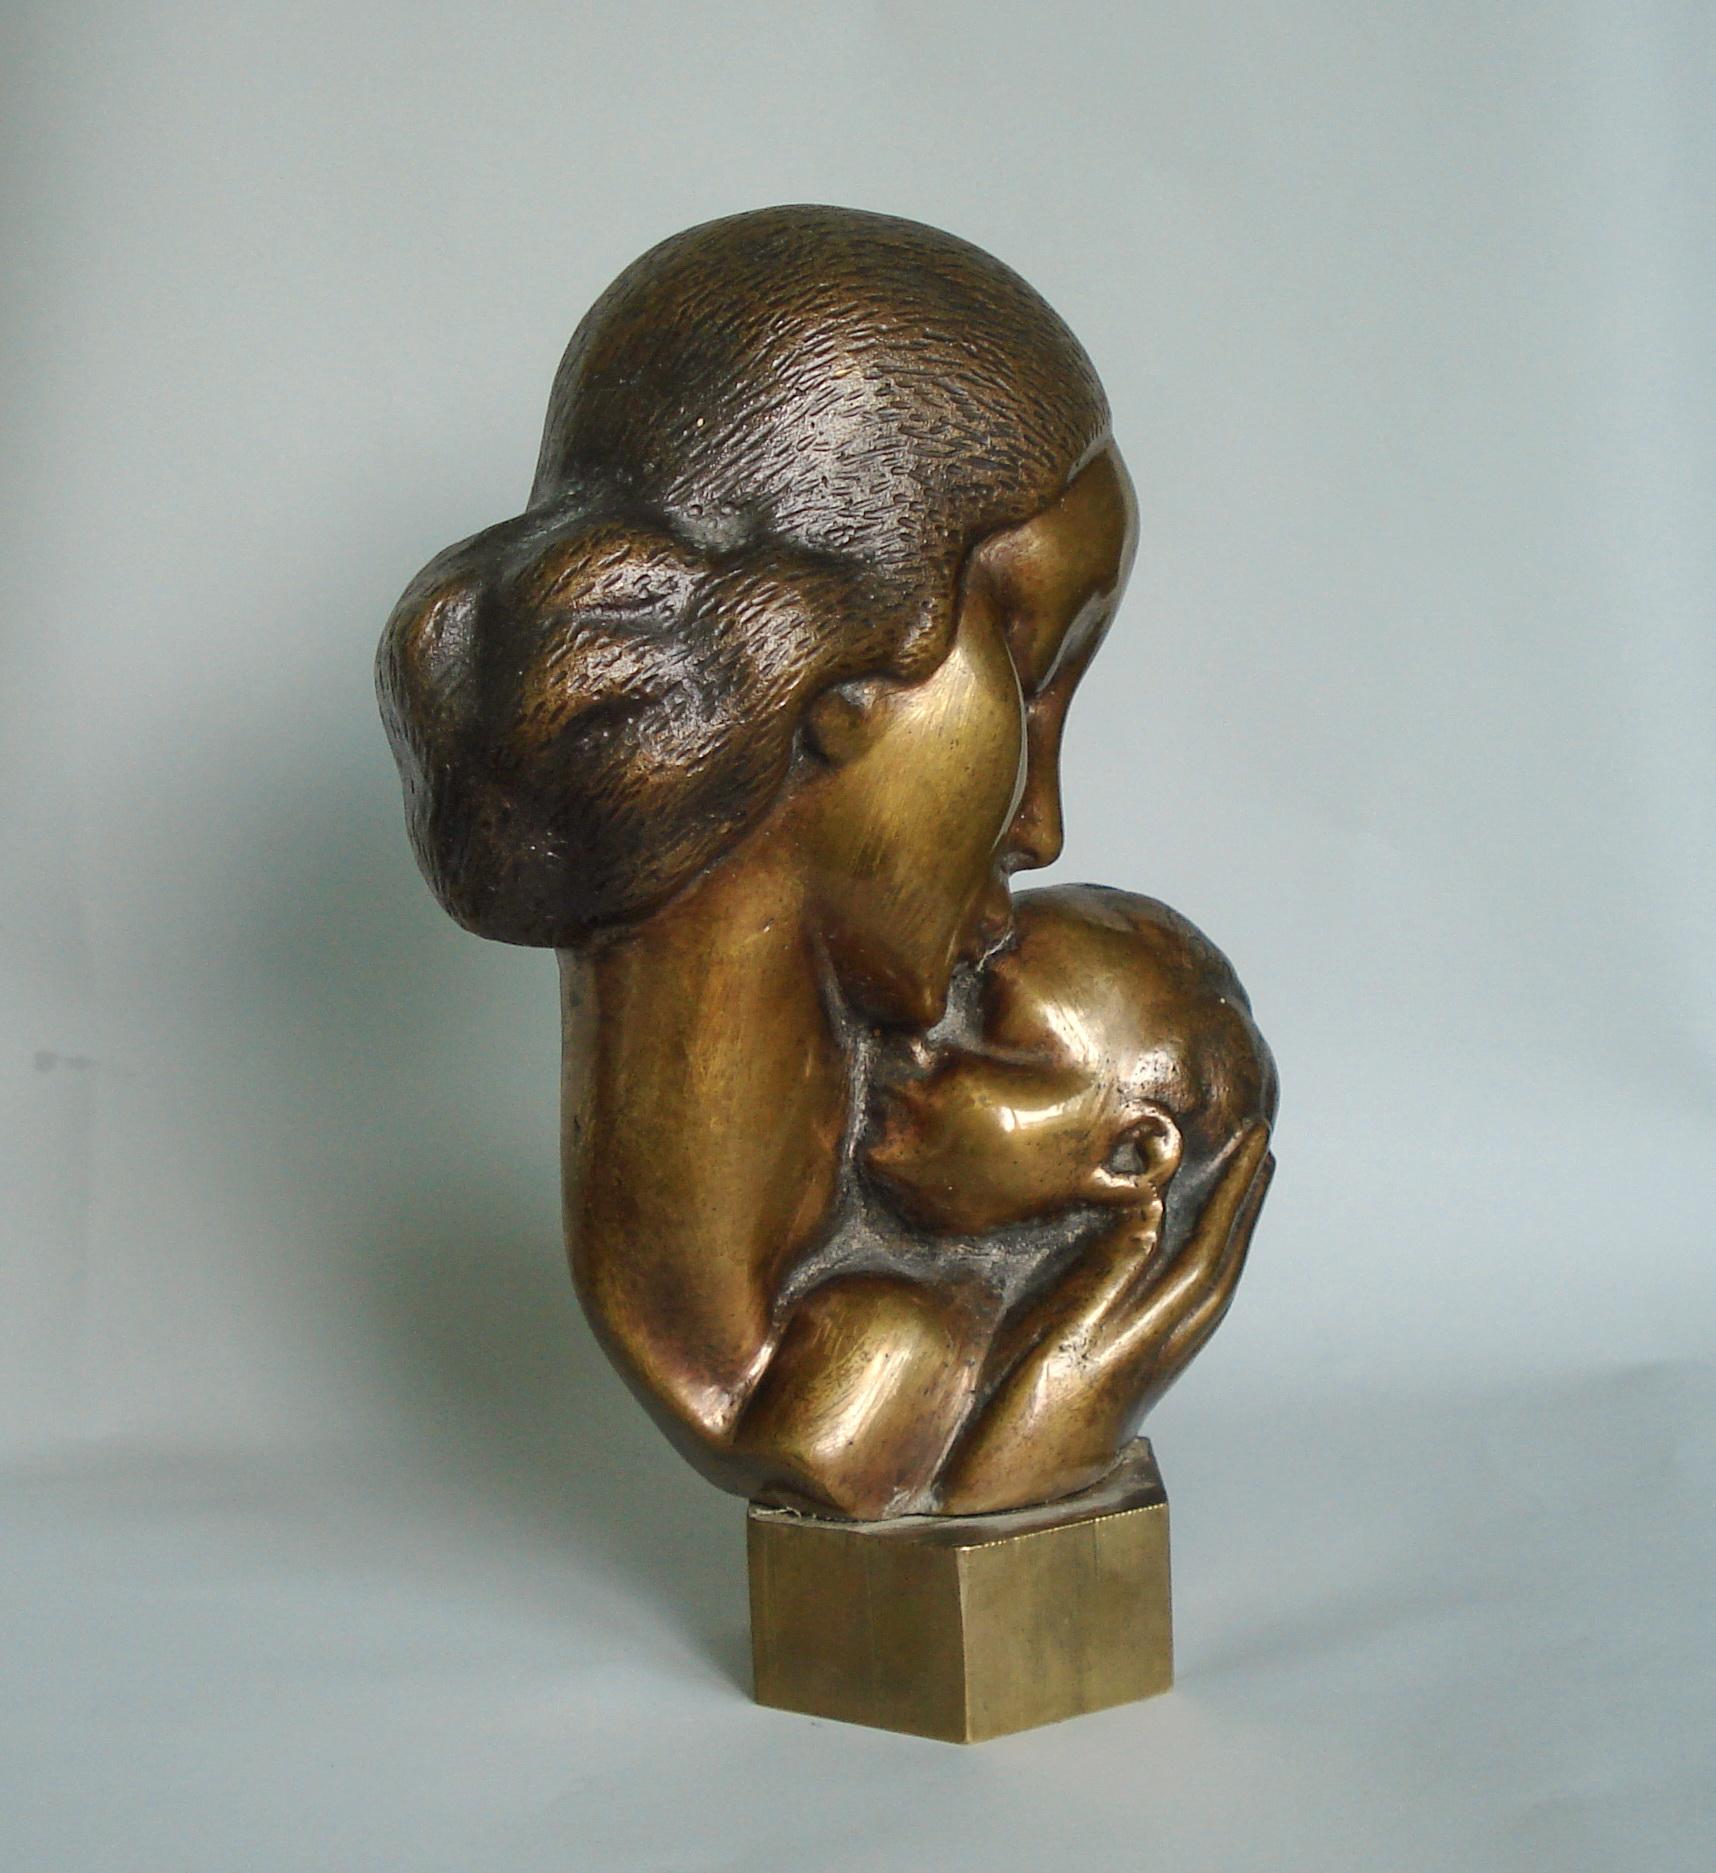 mother and child sculpture